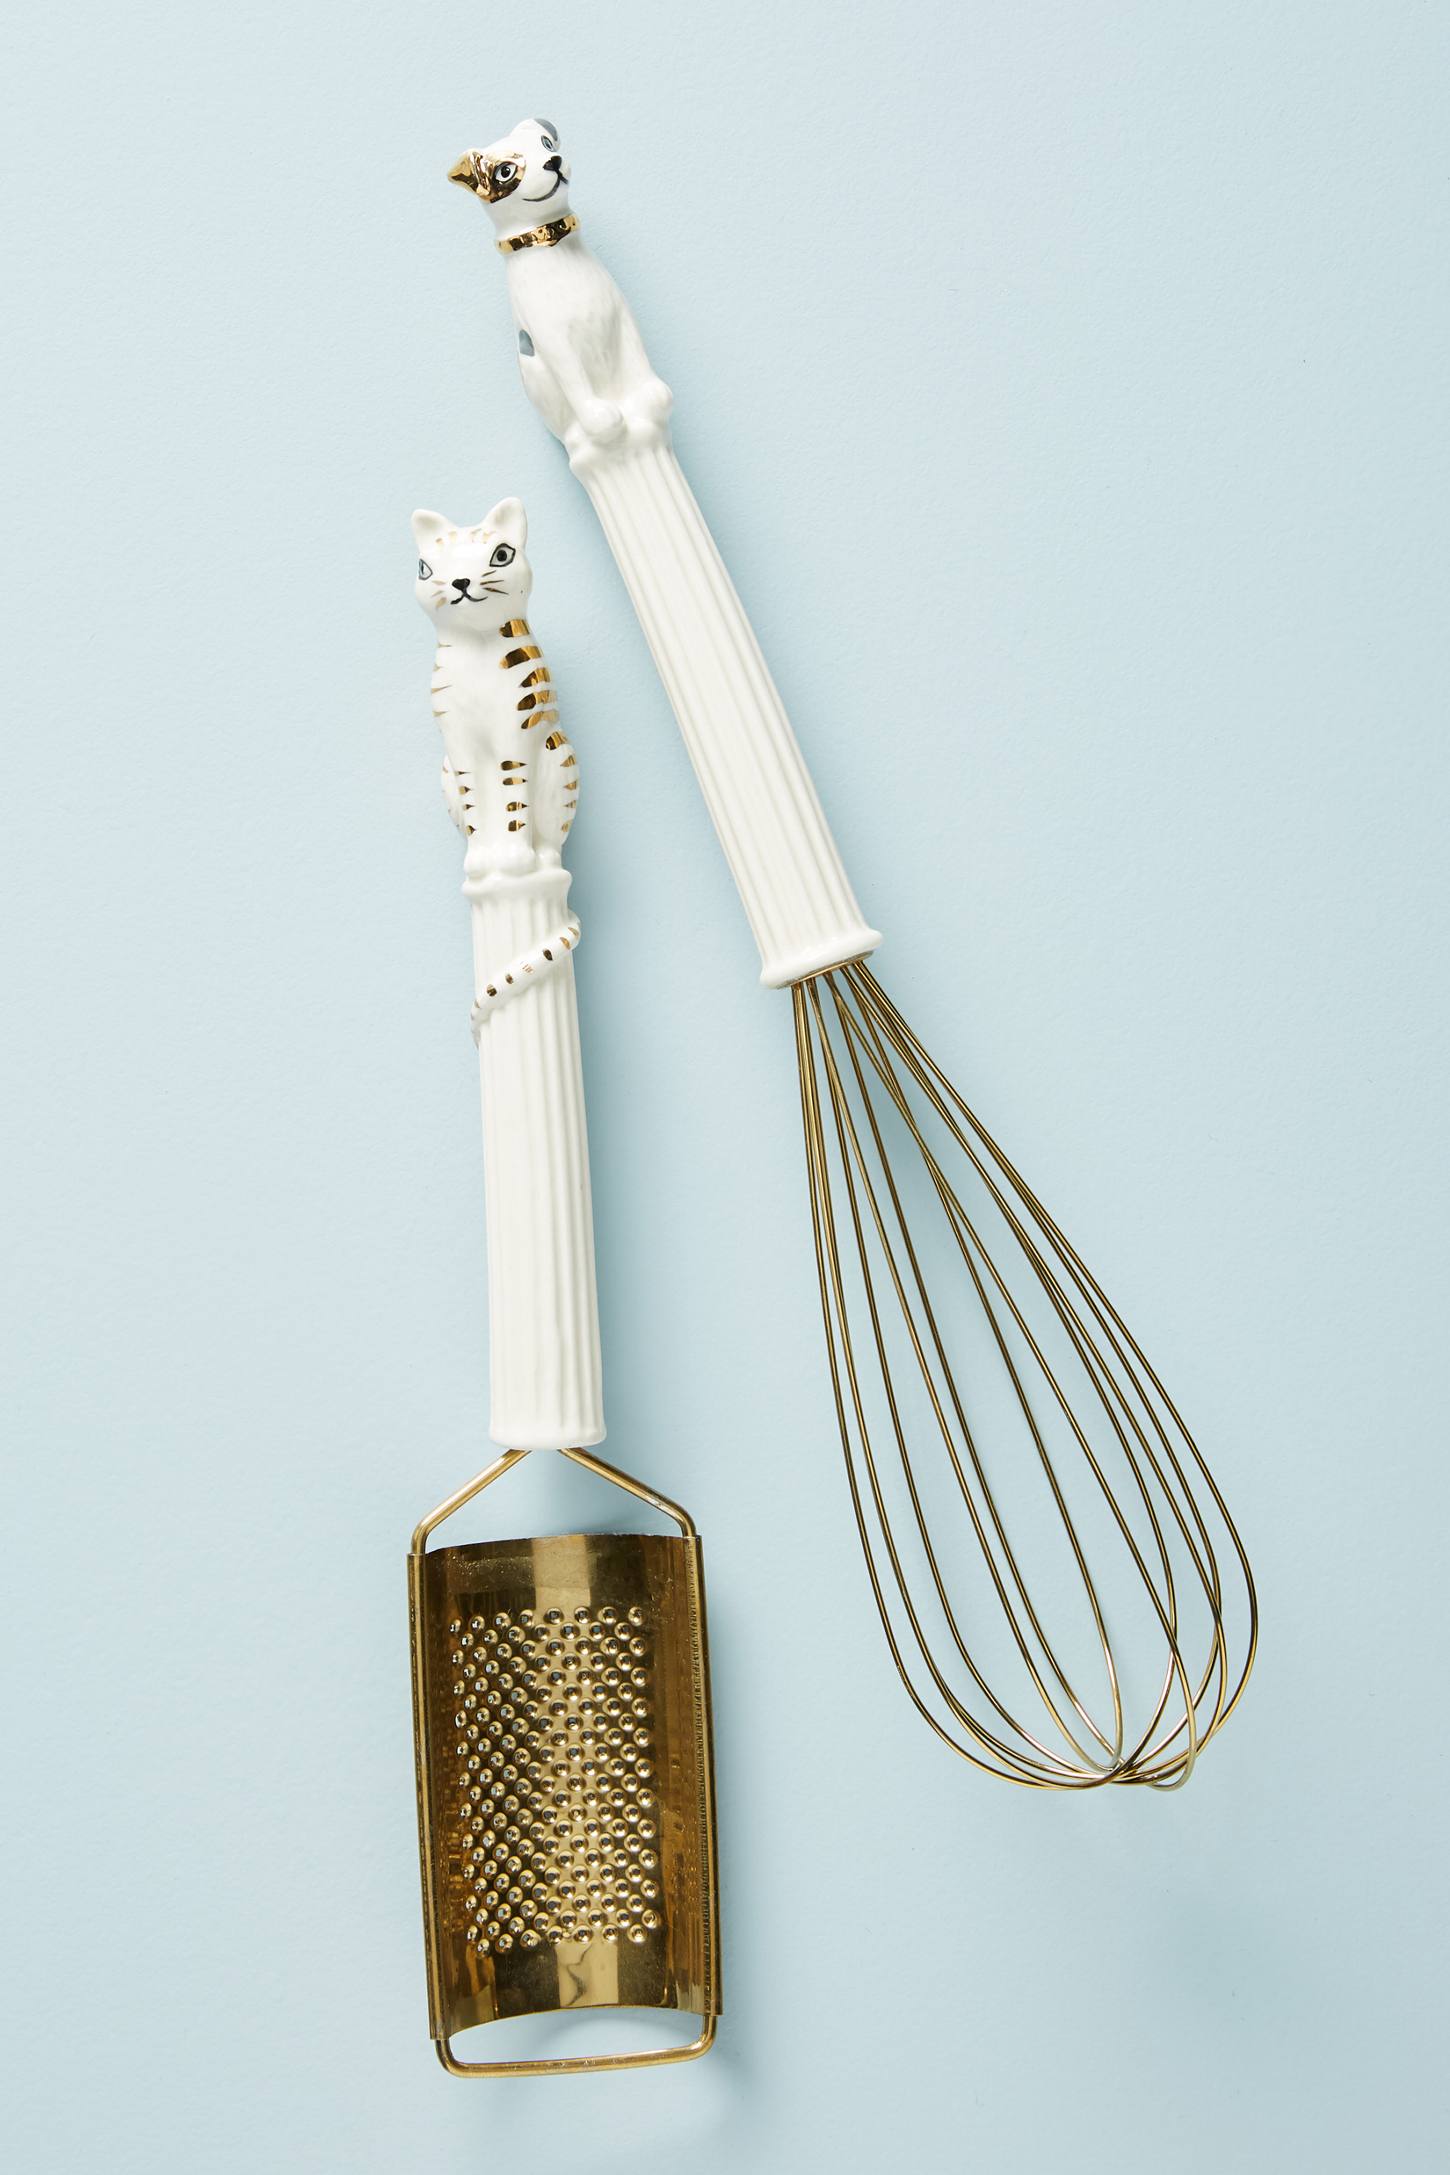 Dog and Cat Whisk and Grater